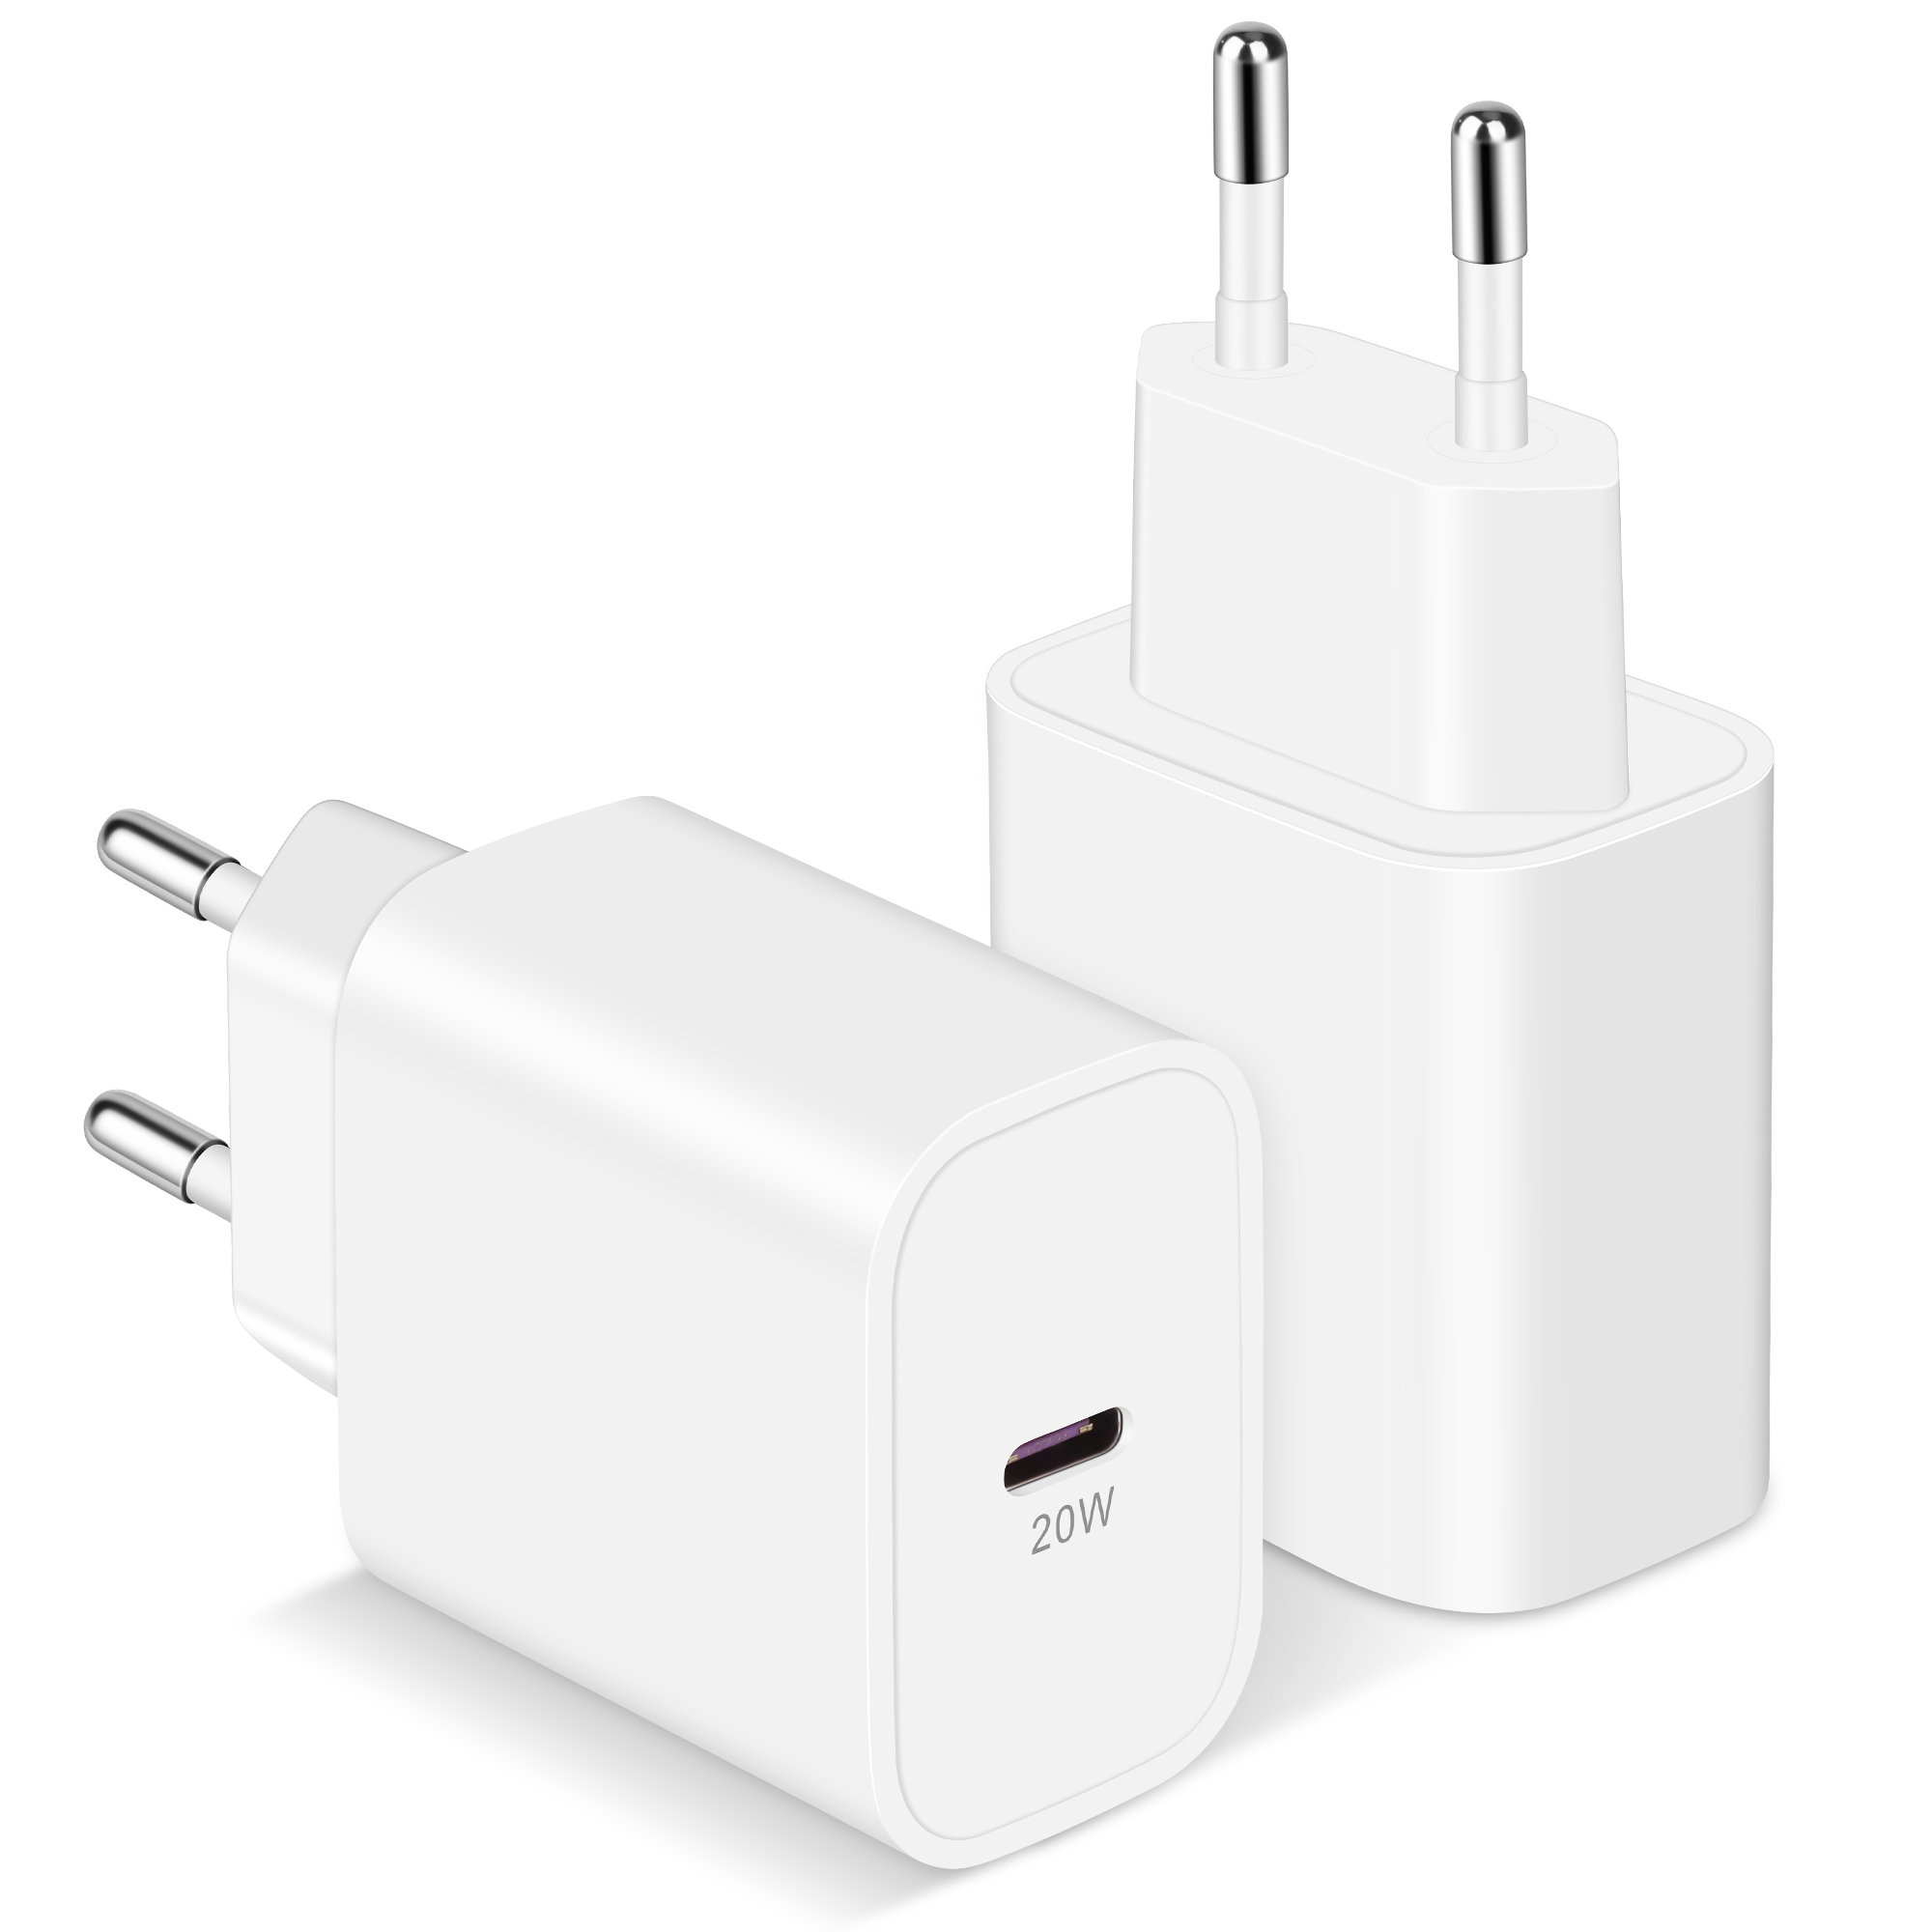 uropean Travel Plug Adapter, LUOSIKE International Type C Power Adapter, 2Pack 20W Fast USB C Wall Charger Block for US to Most of Europe EU Germany France Italy Spain Iceland Greece Belgium Turkey